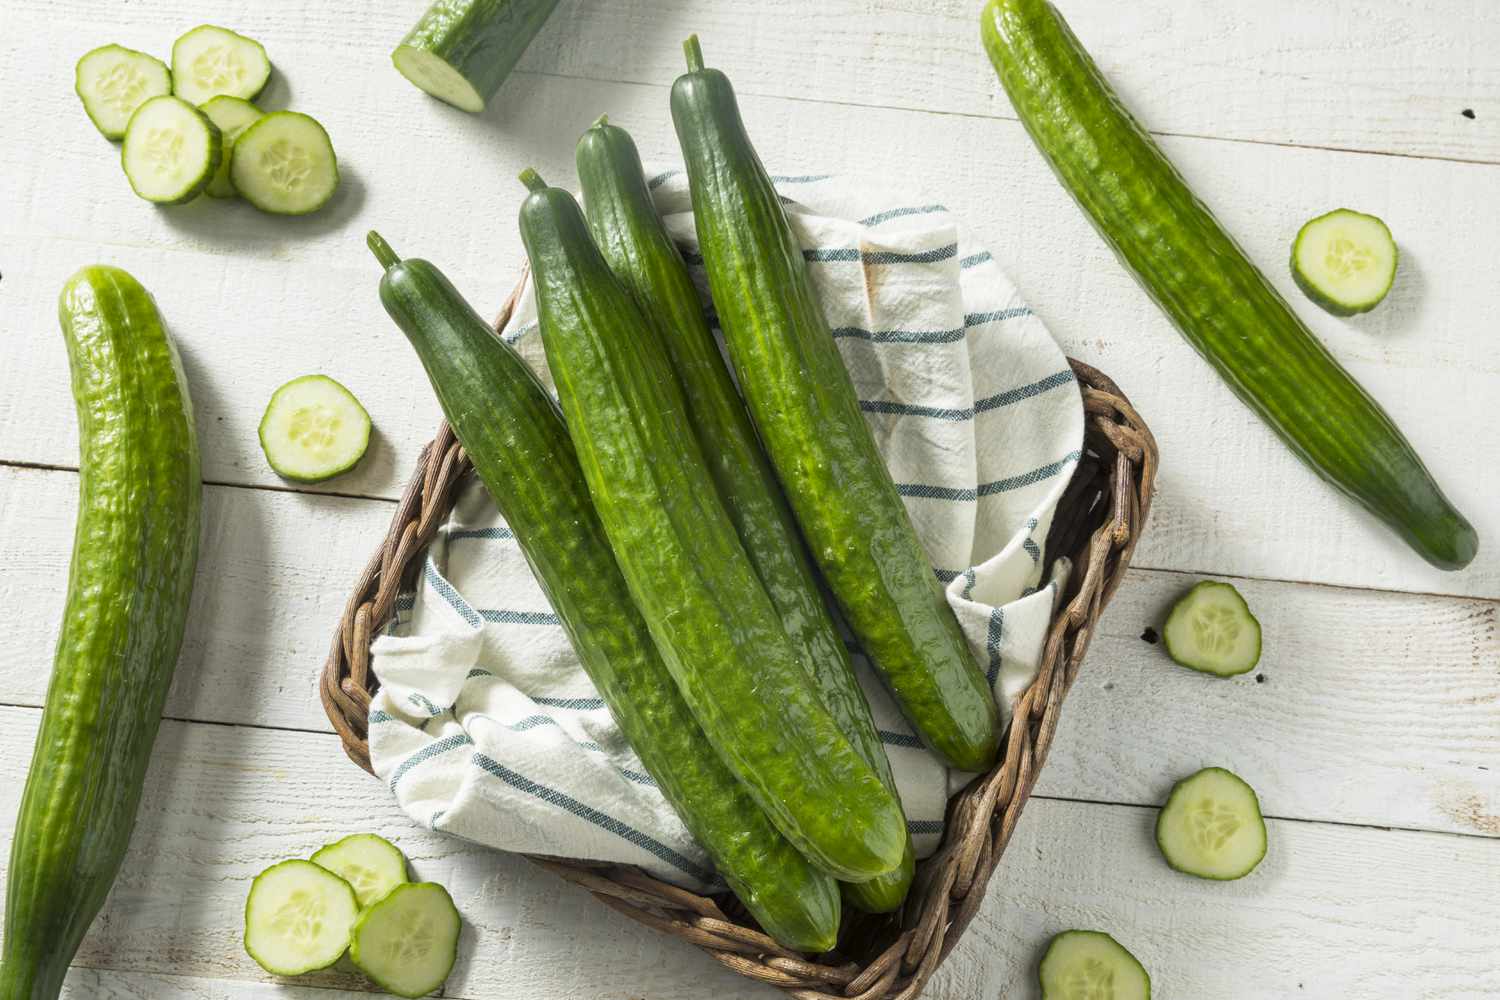 How To Store English Cucumbers After Cutting